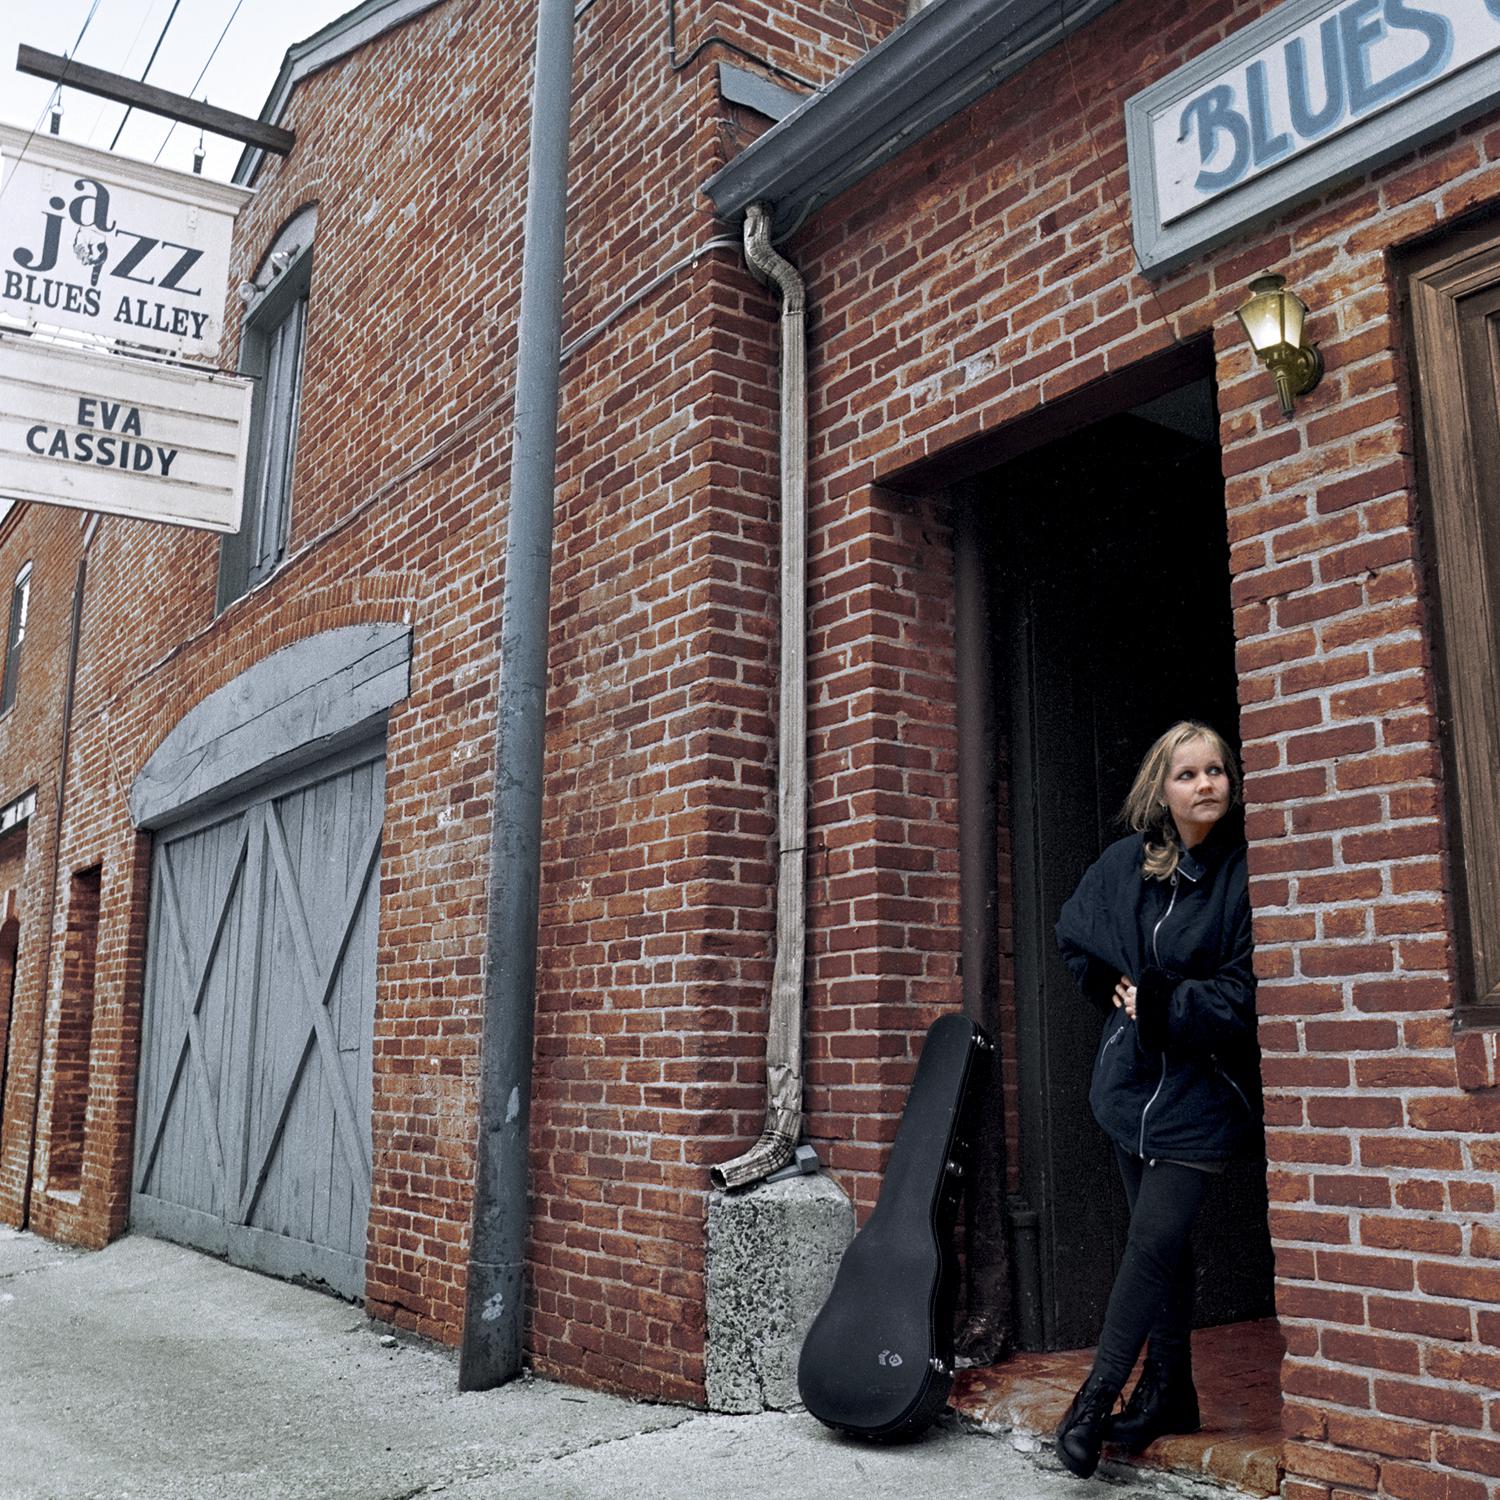 Eva Cassidy - Tall Trees In Georgia (Live At Blues Alley) [2021 Master]